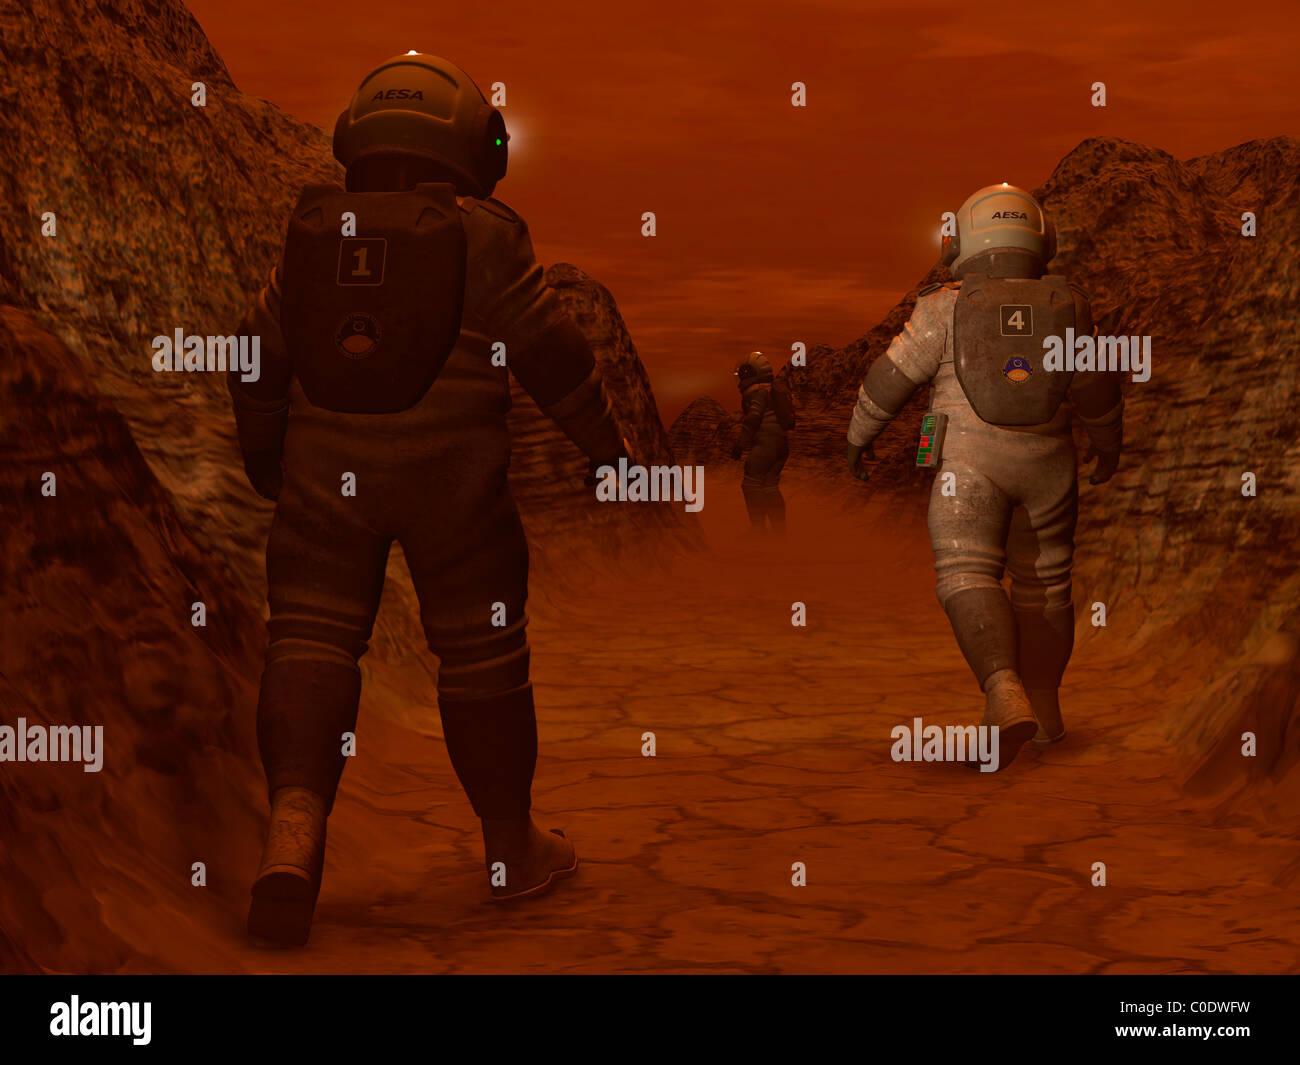 Artist's concept of astronauts exploring a dry gully on Saturn's moon Titan. Stock Photo